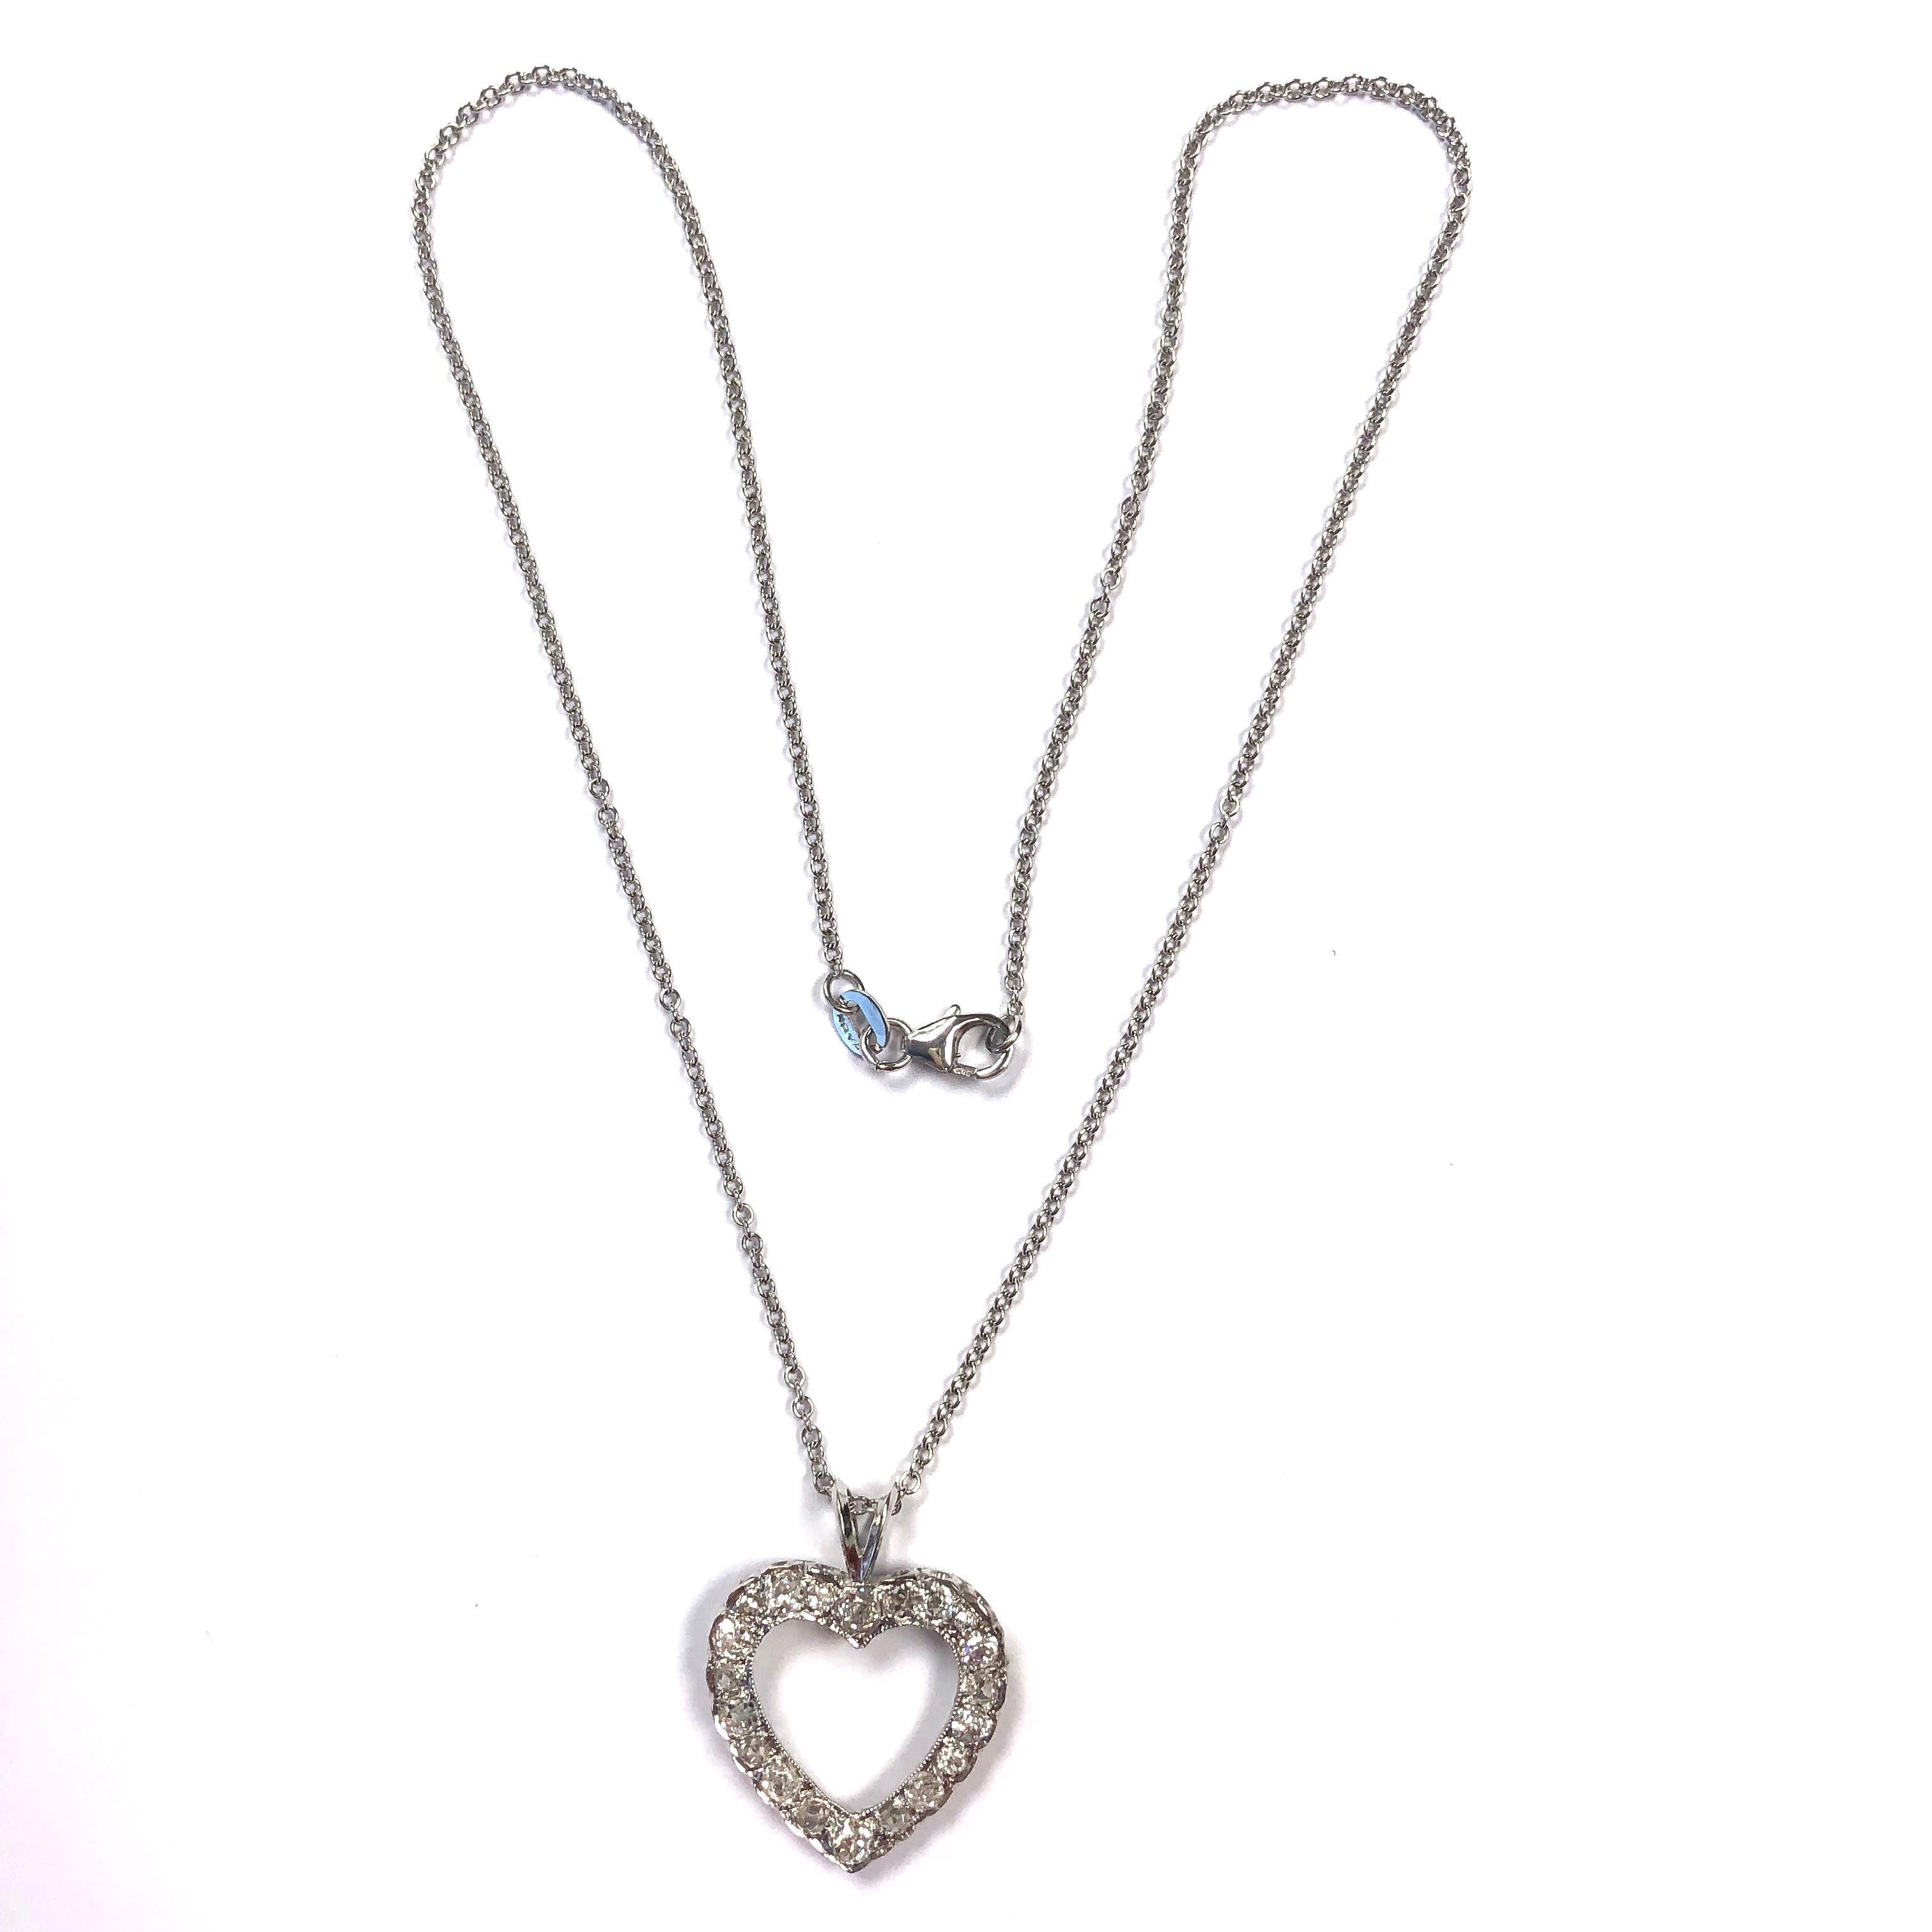 The pendant is crafted in 14K white gold and set with twenty old european and rose cut diamonds, supported by a sixteen inch rolo chain with lobster claw clasp. Approximate total diamond weight: 1.60ct. Clarity: SI1-I1, Color: